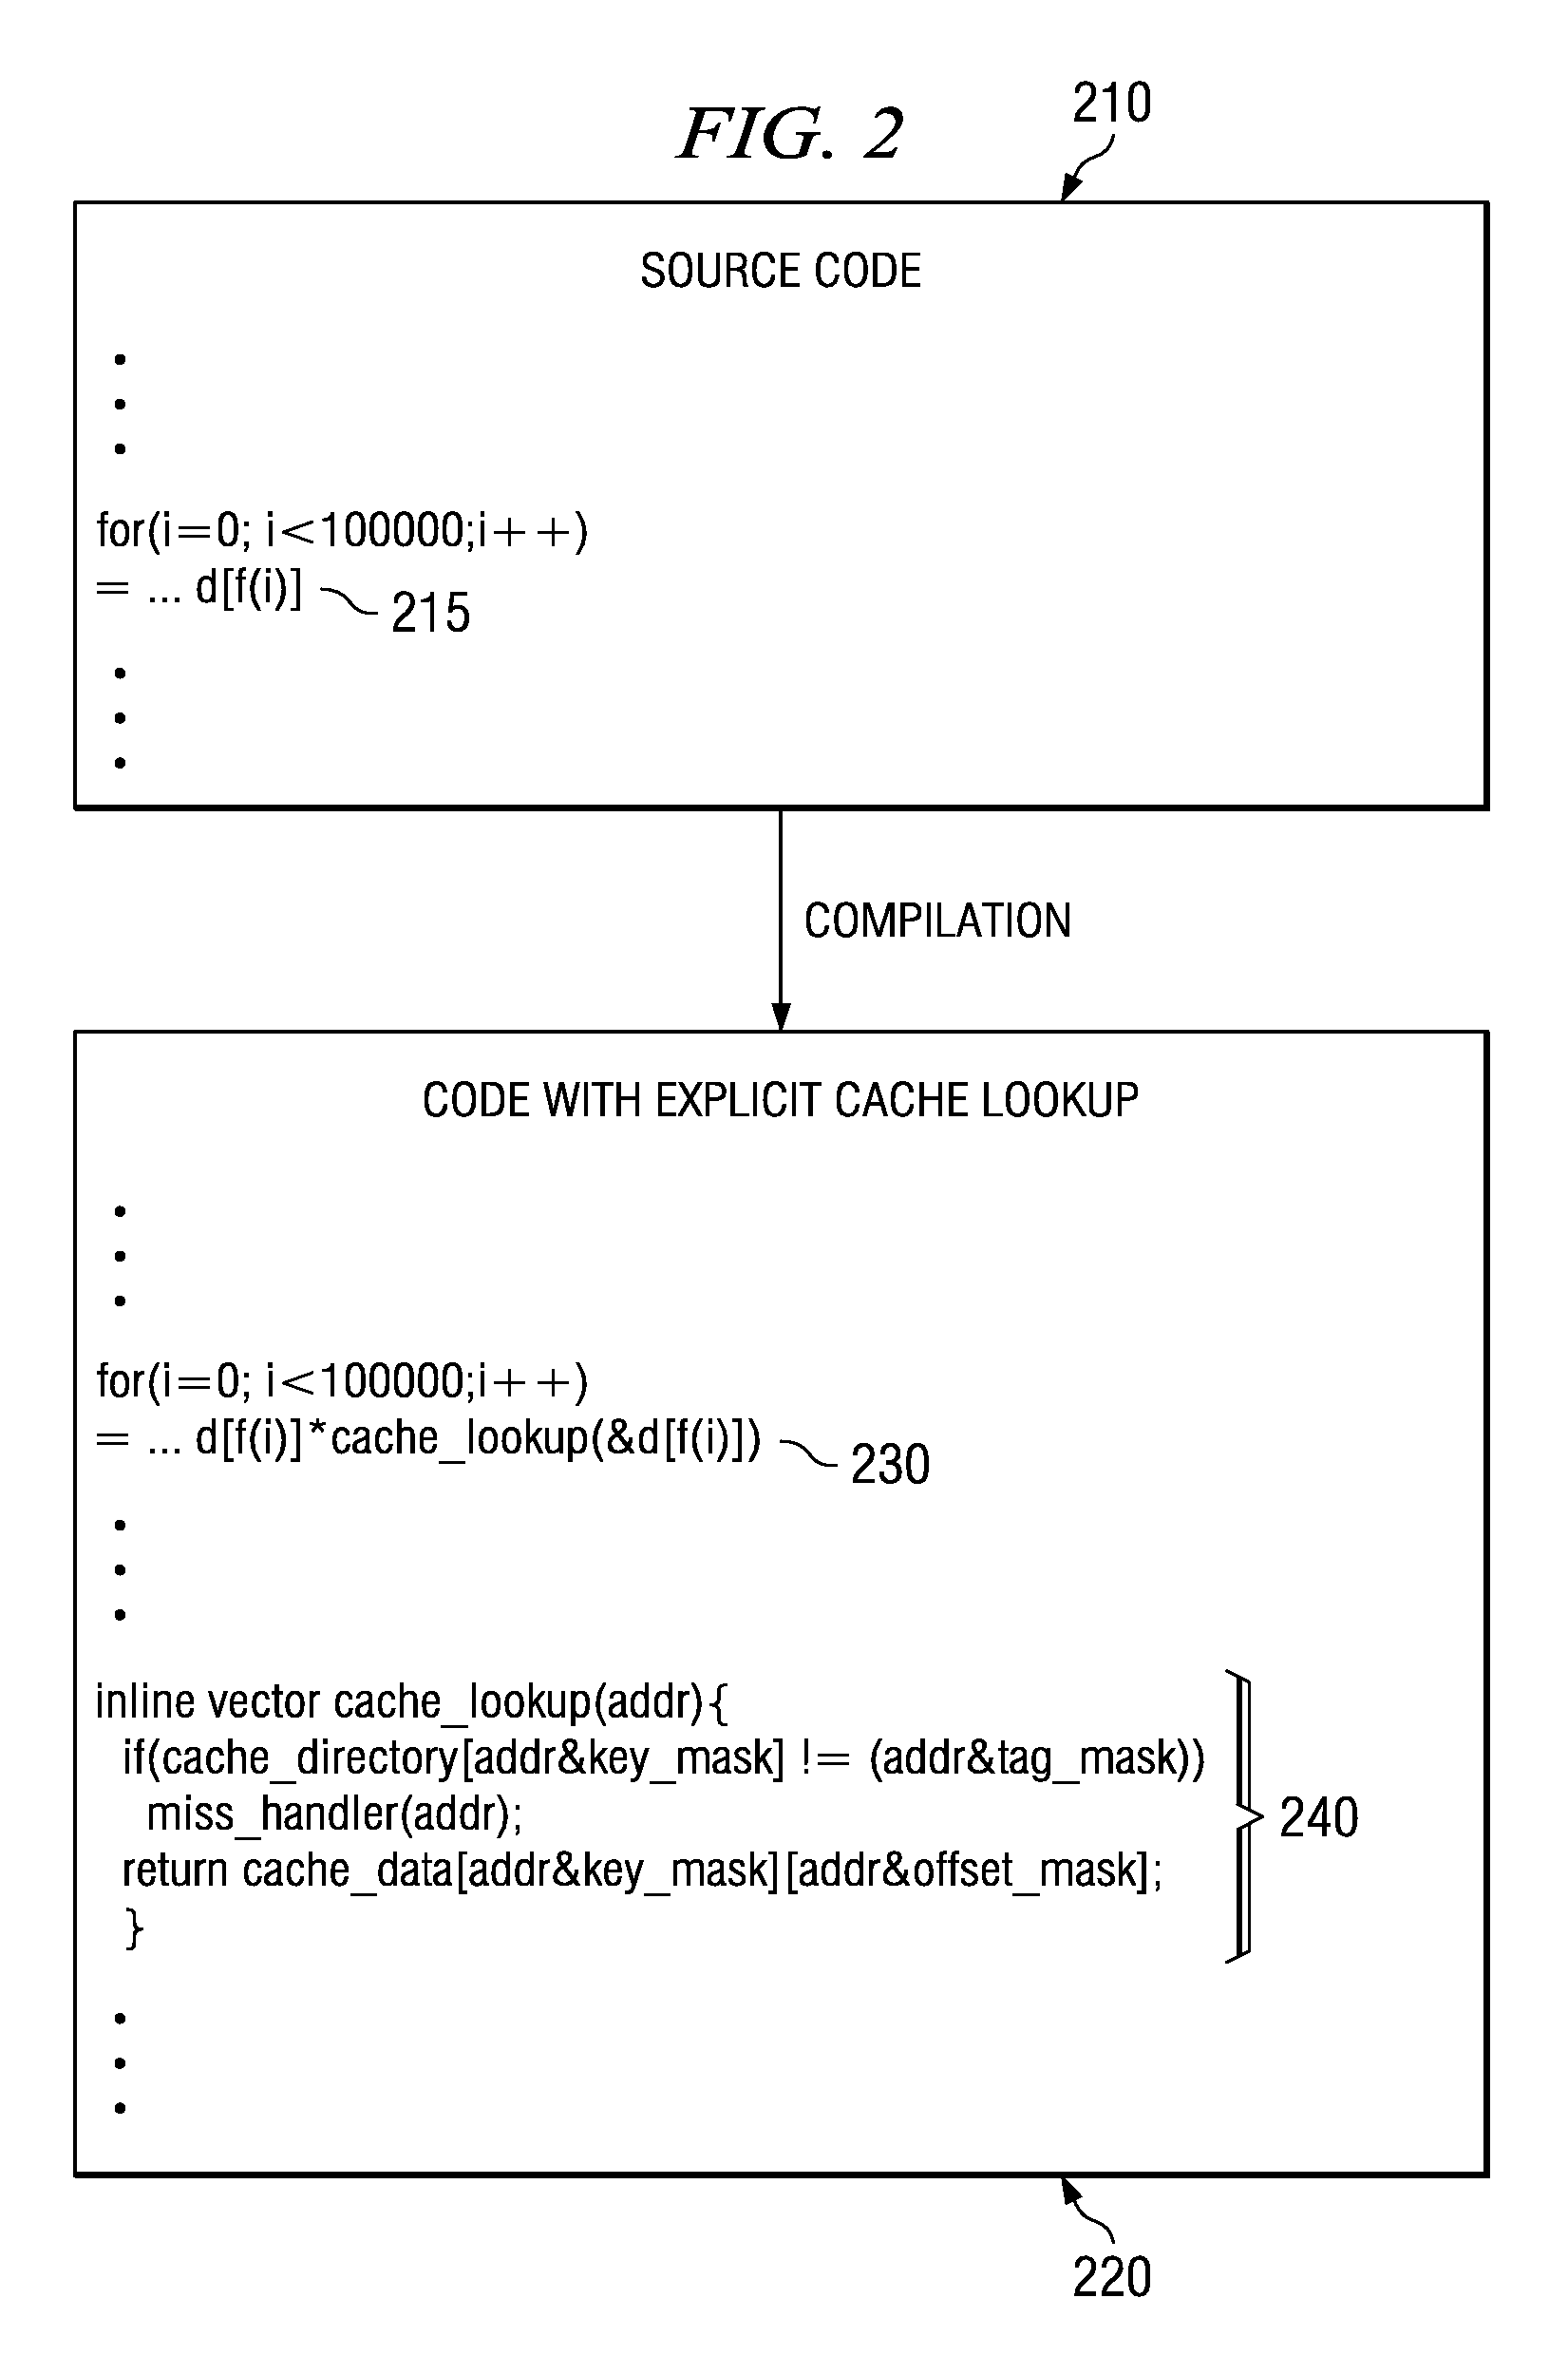 Performing useful computations while waiting for a line in a system with a software implemented cache